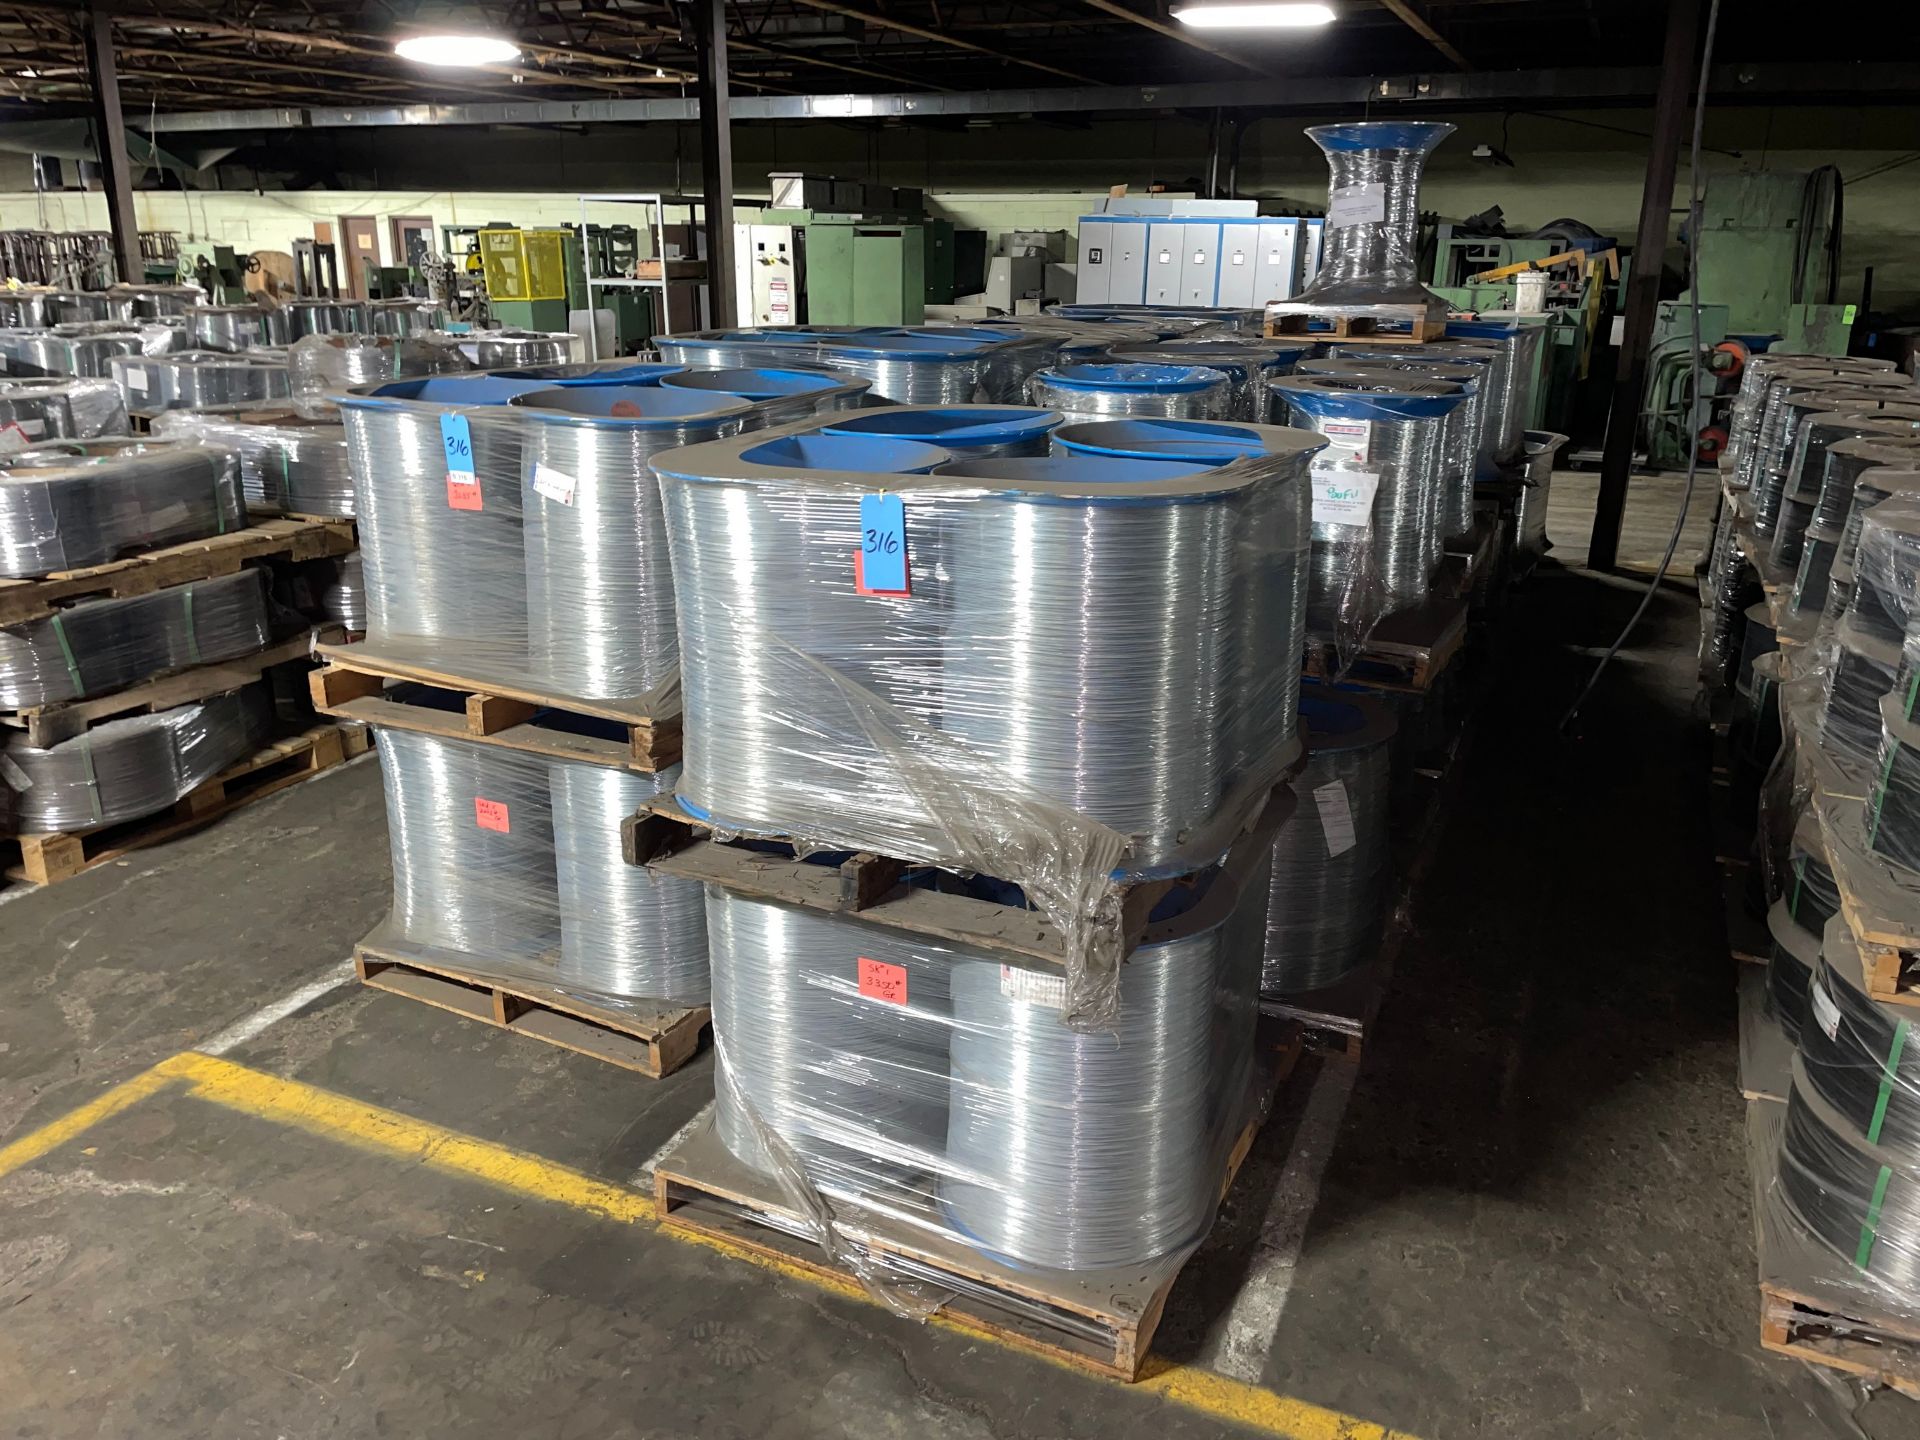 Appoximately (36) Pallets of .0378 Coated Galvanized Carbon Steel, Weighs approximately 55,000Lbs - Image 2 of 6